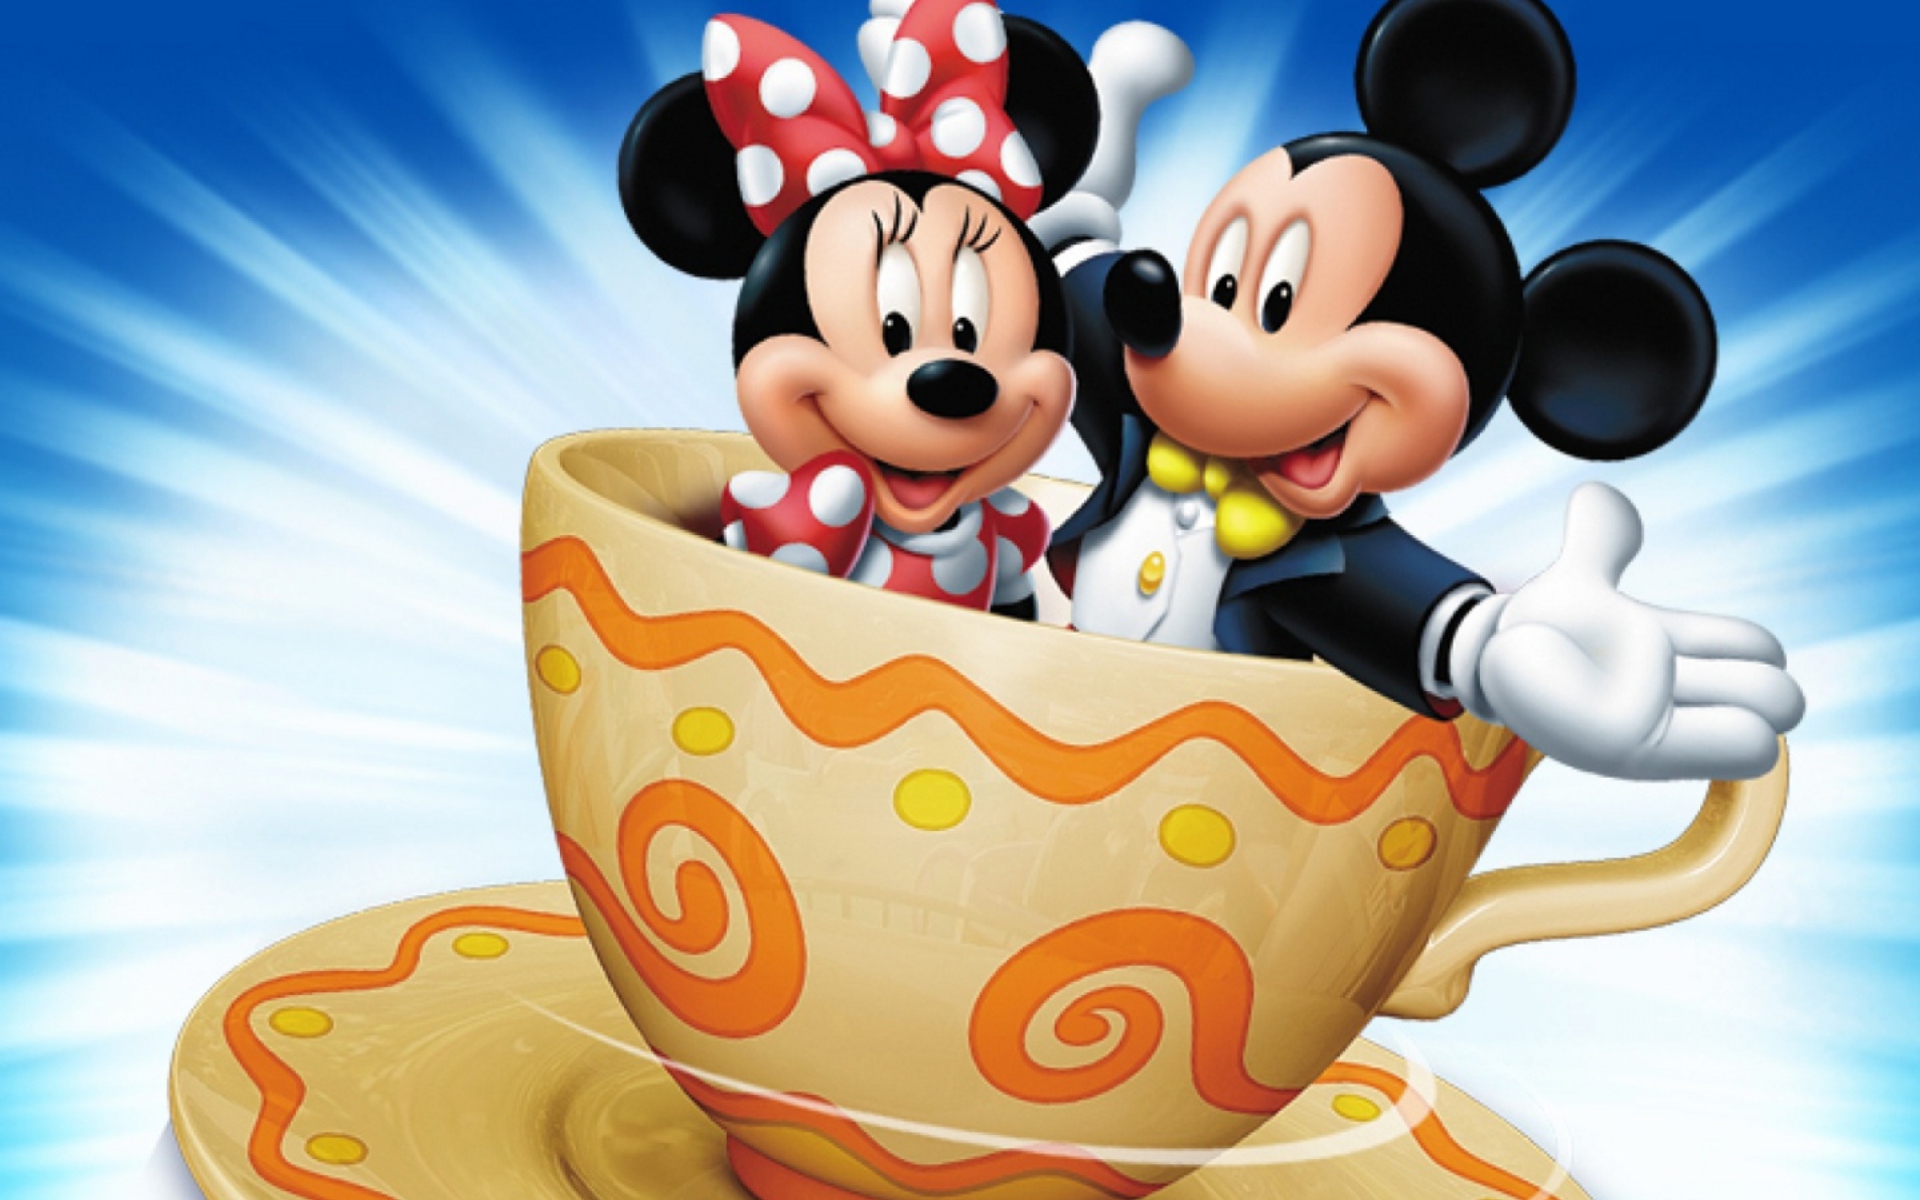 Mickey And Minnie Mouse In Cup screenshot #1 1920x1200